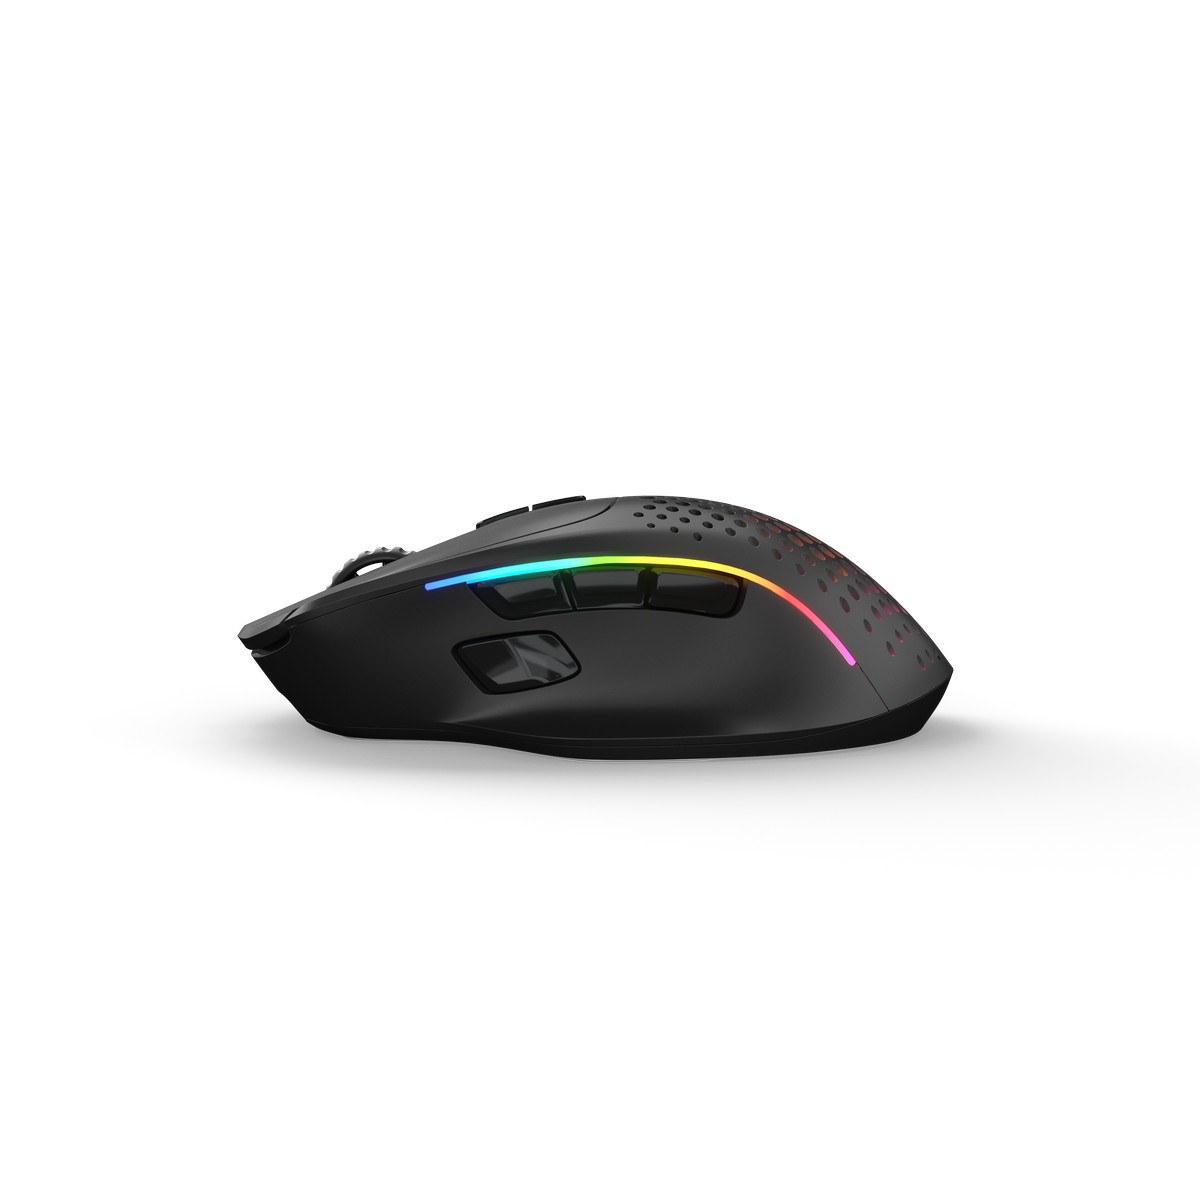 Glorious - Glorious Model I 2 Wireless RGB Optical Gaming Mouse - Matte Black (GLO-MS-IWV2-MB)